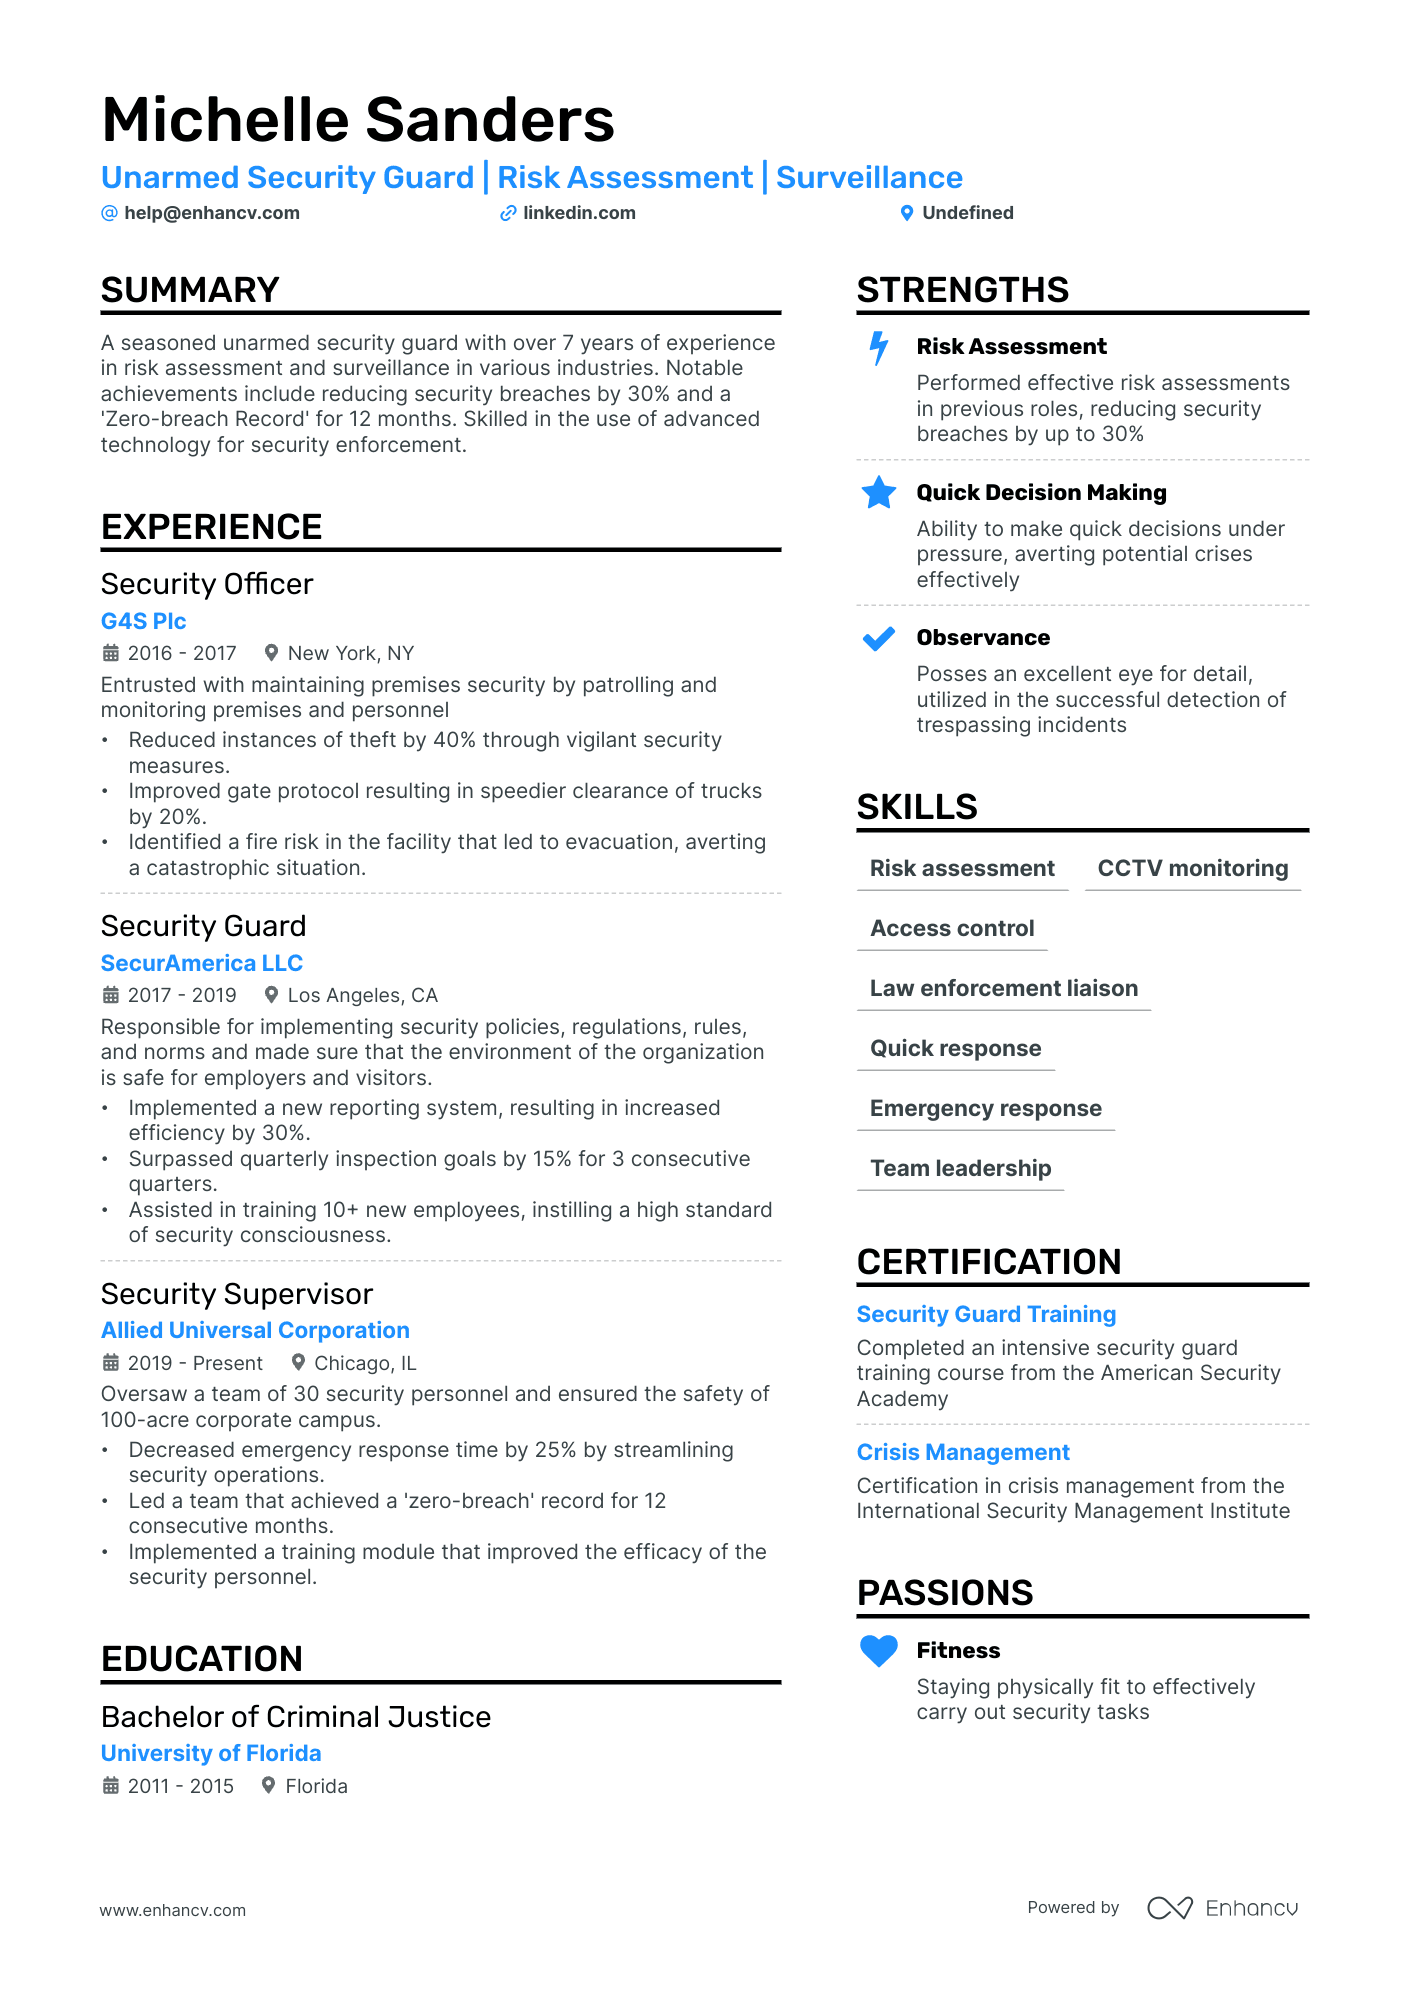 how to write resume for security guard job